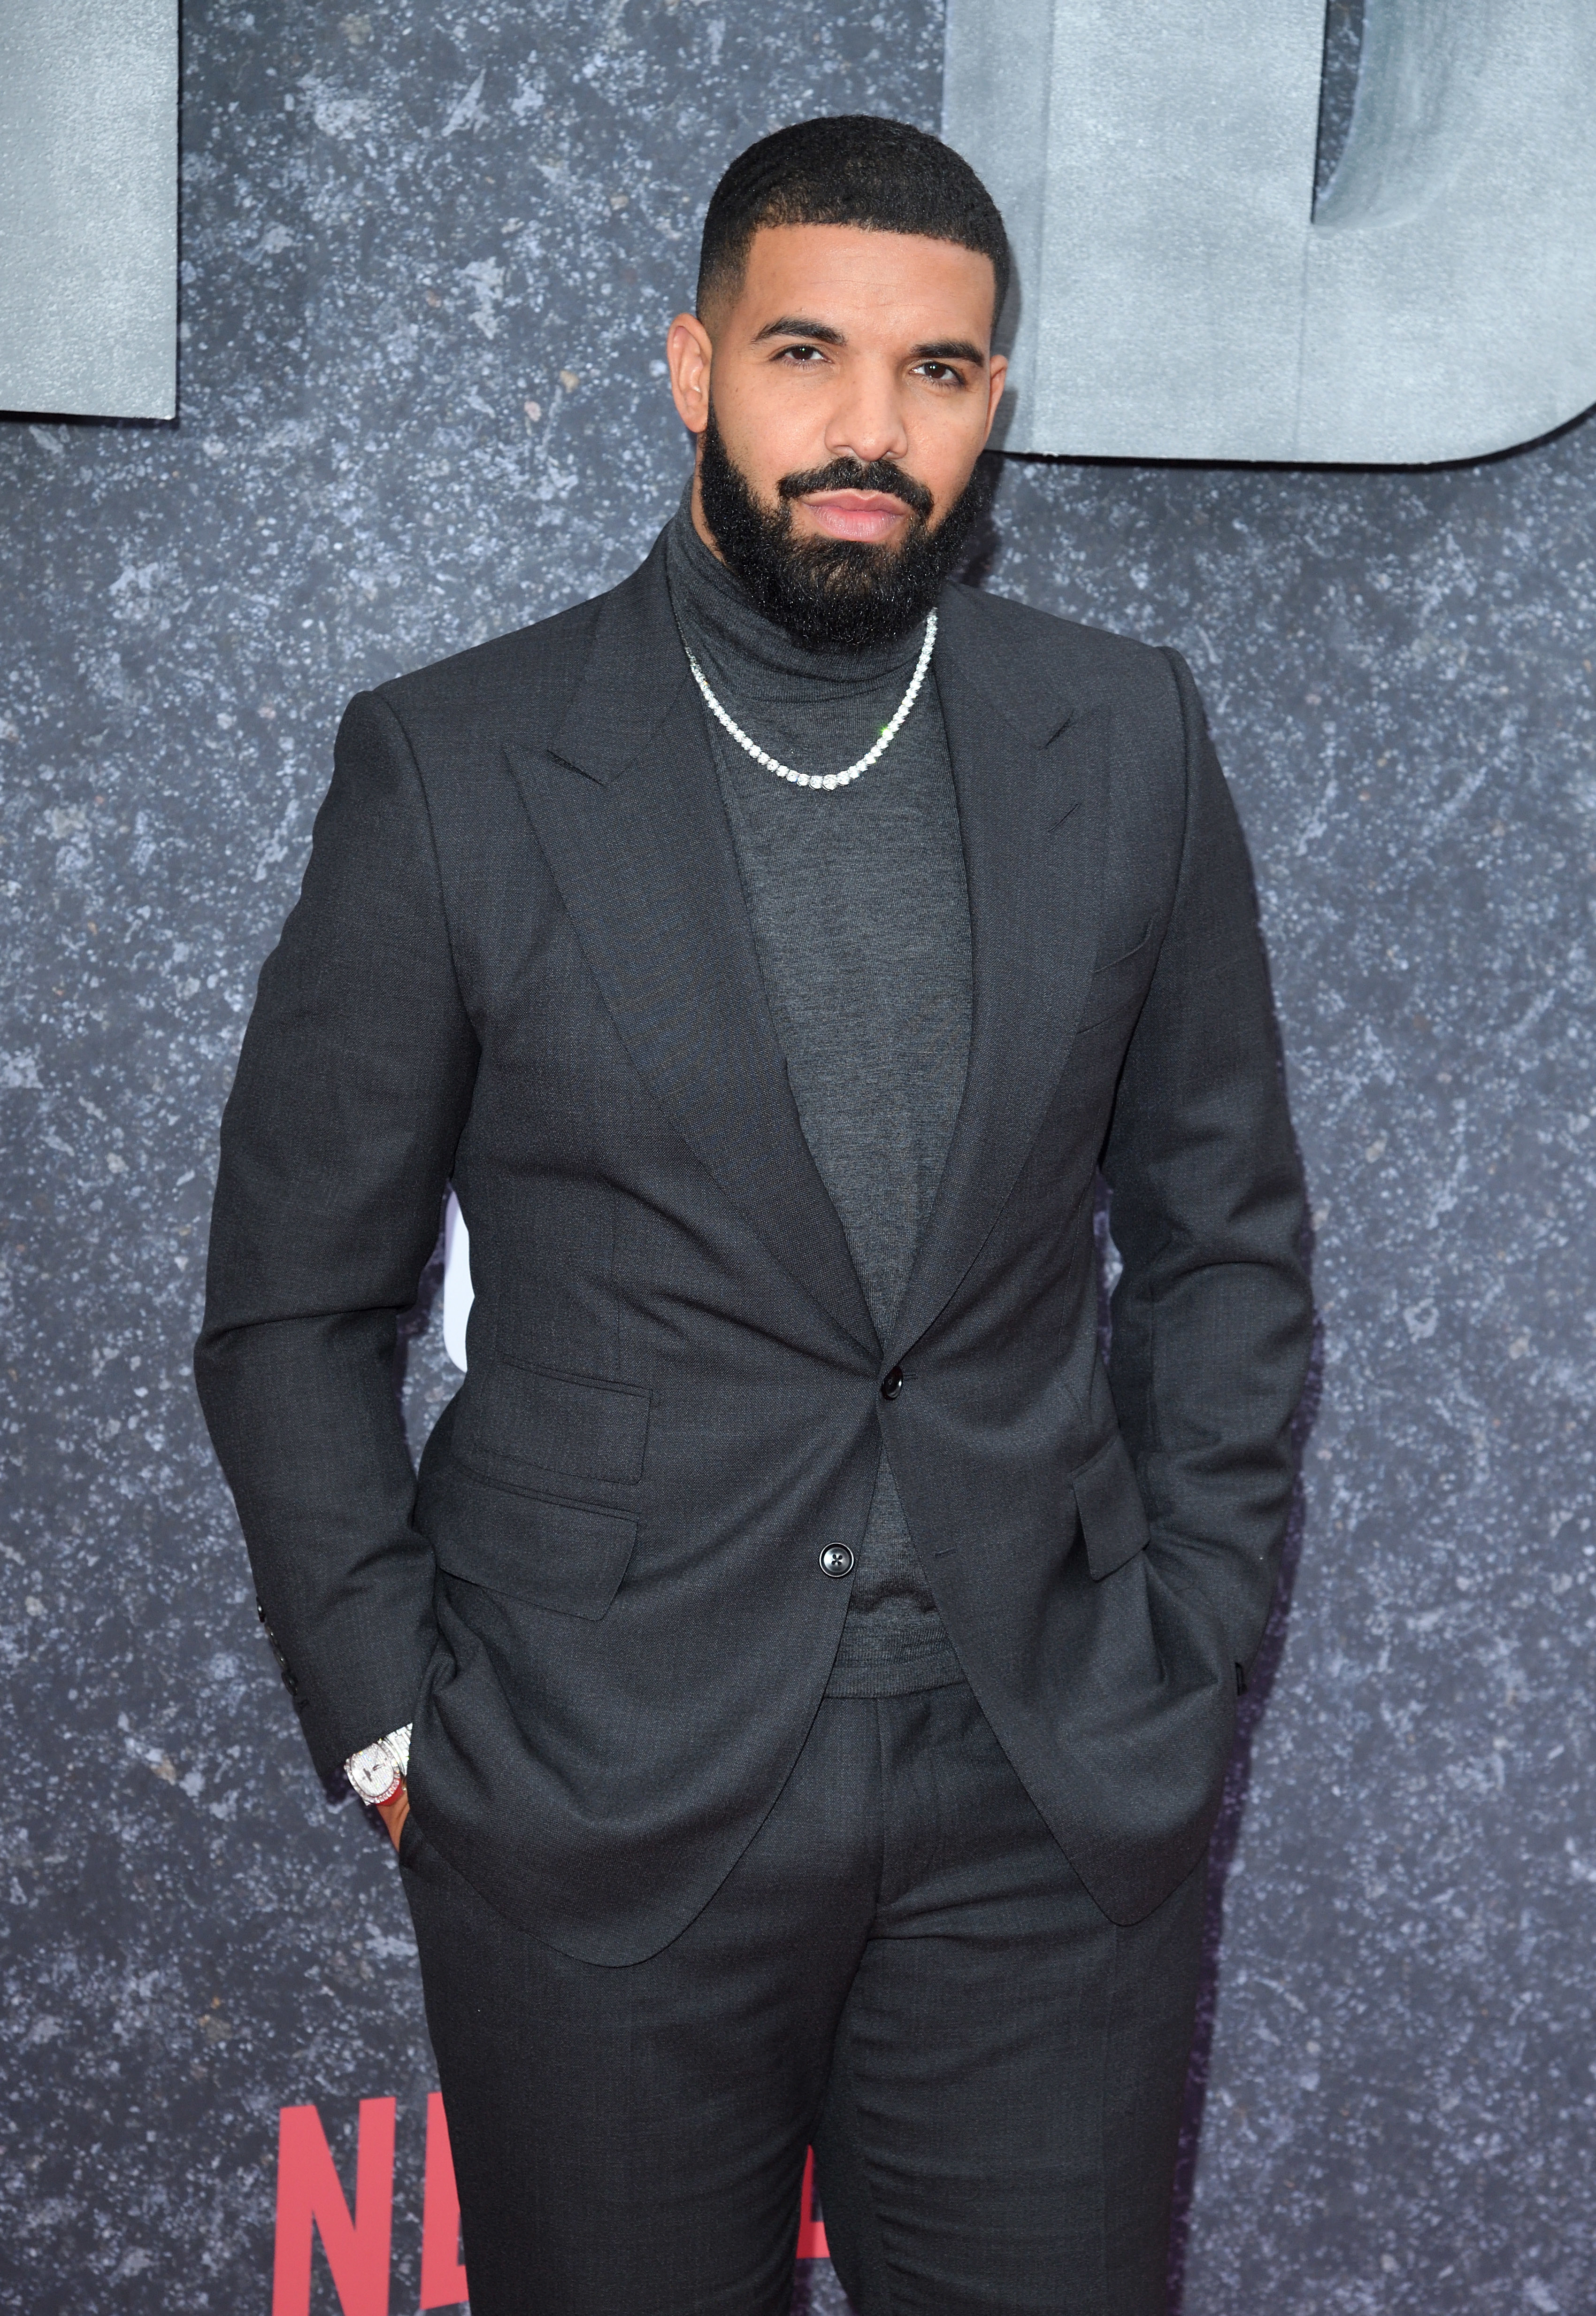 Drake in a suit